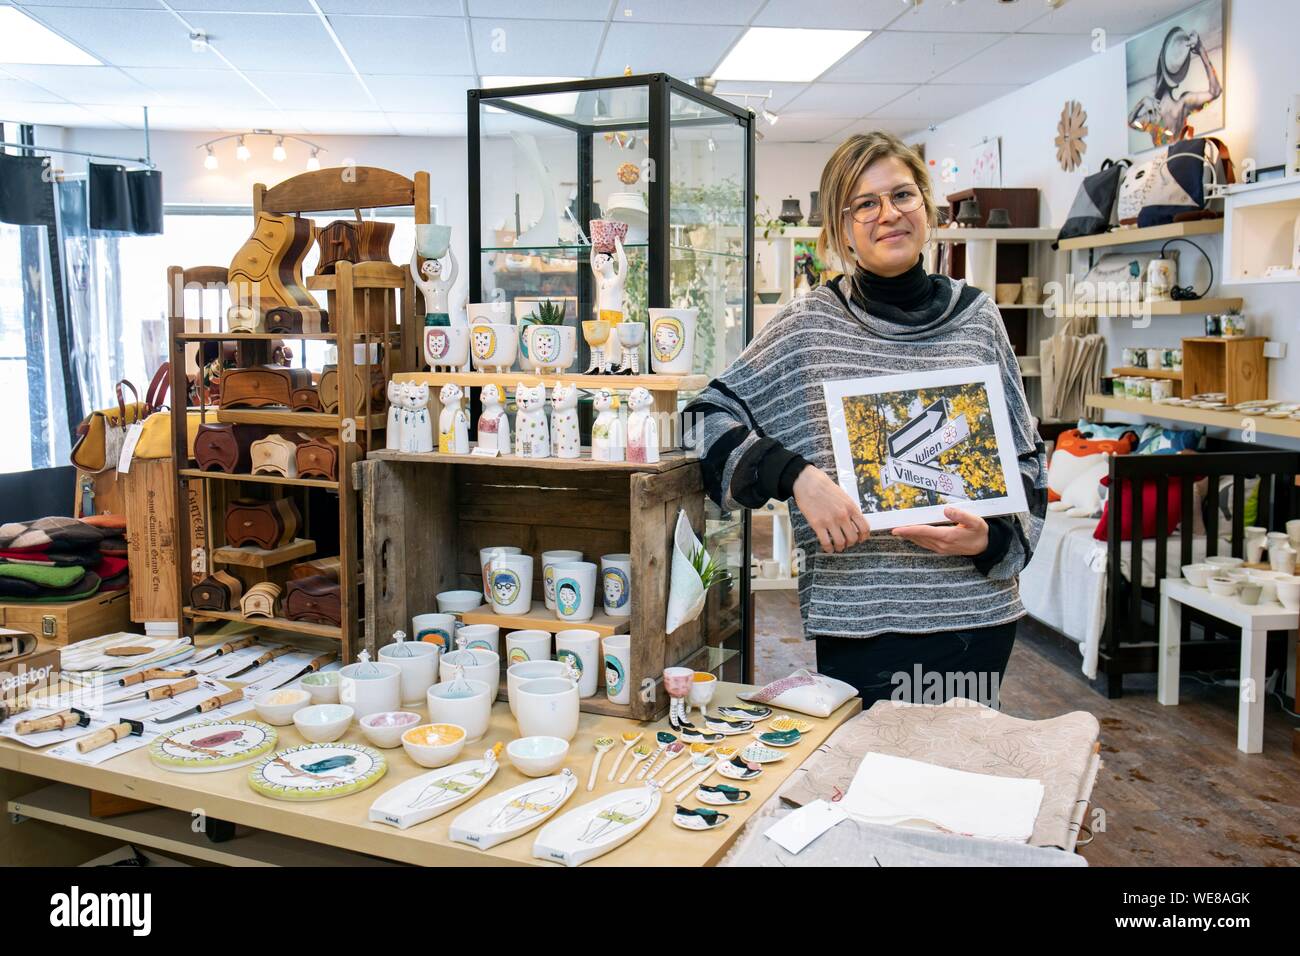 Canada, Quebec province, Montreal, Villeray neighborhood, Articho boutique, craft items made by local artisans, Sabrina Bouchard owner Stock Photo